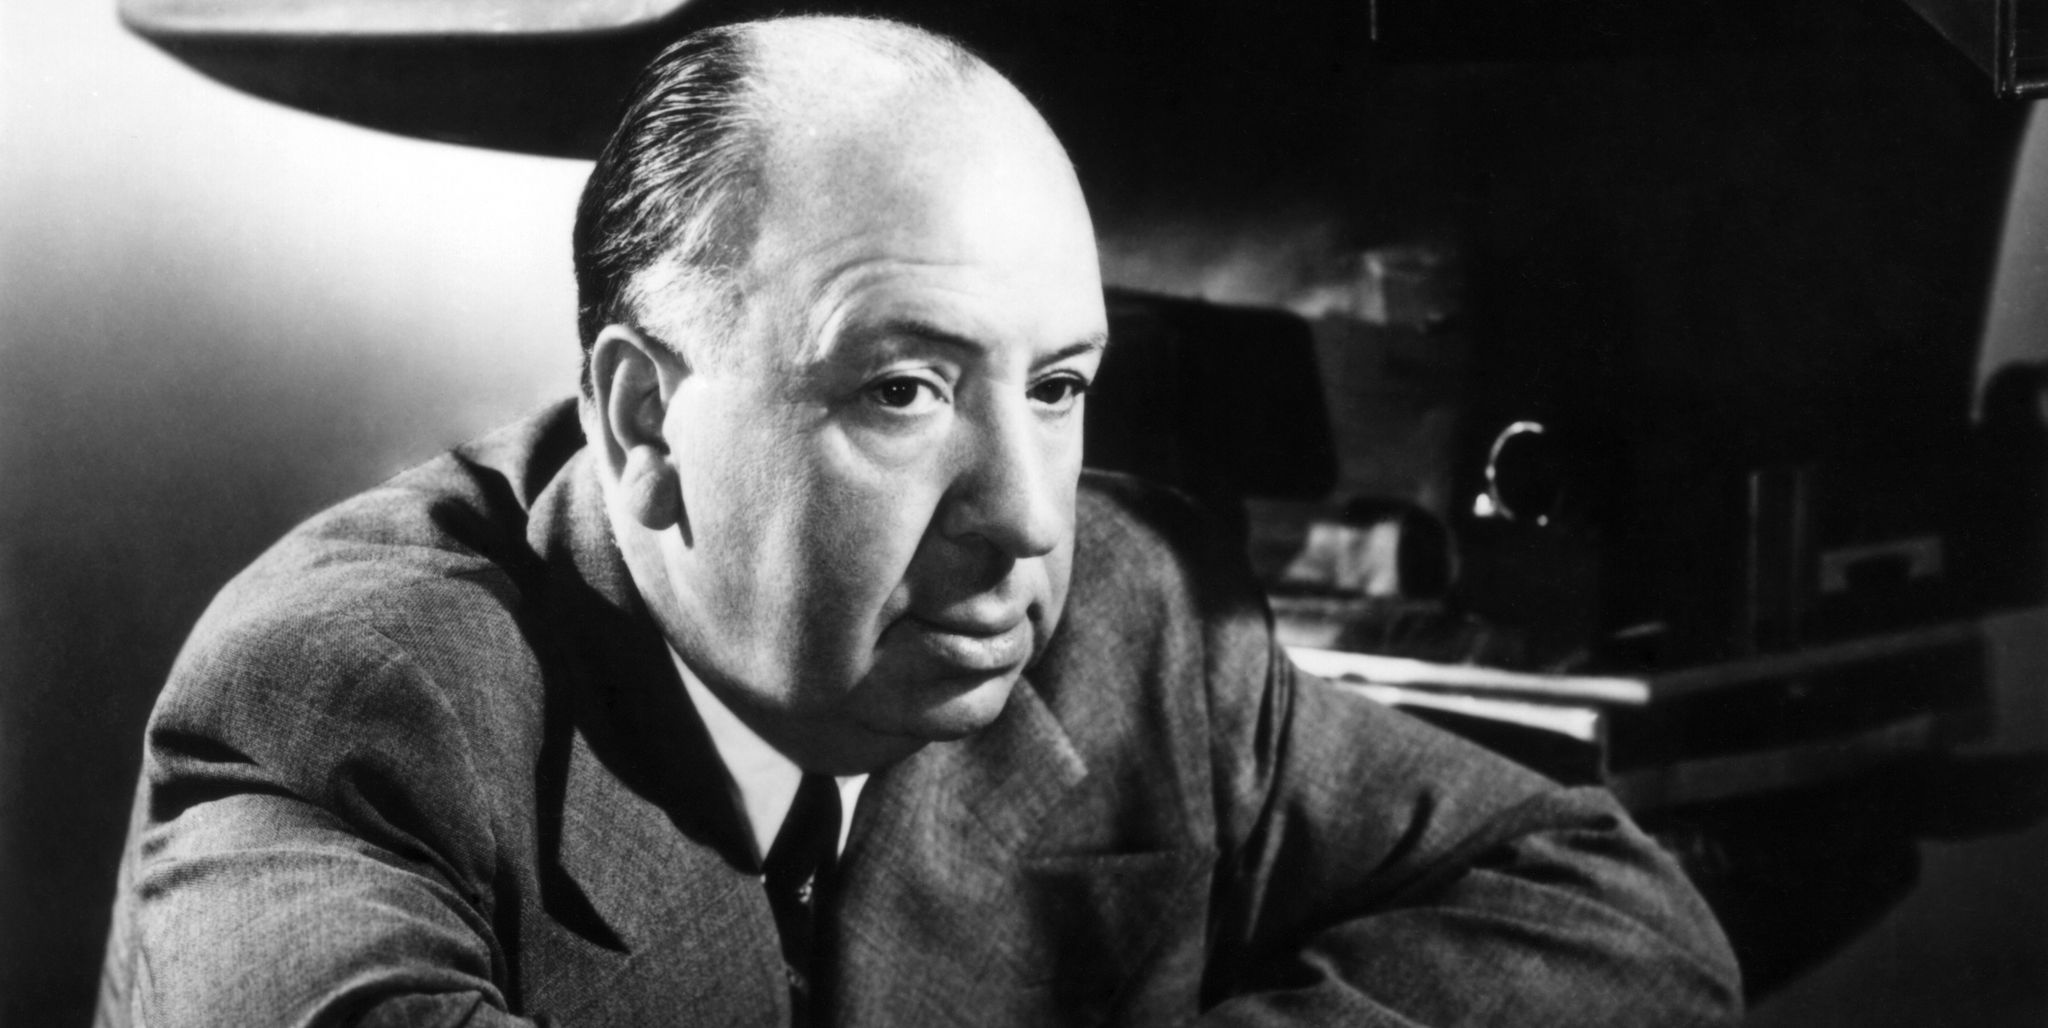 alfred hitchcock with directors chair photo by herbert dorfmancorbis via getty images